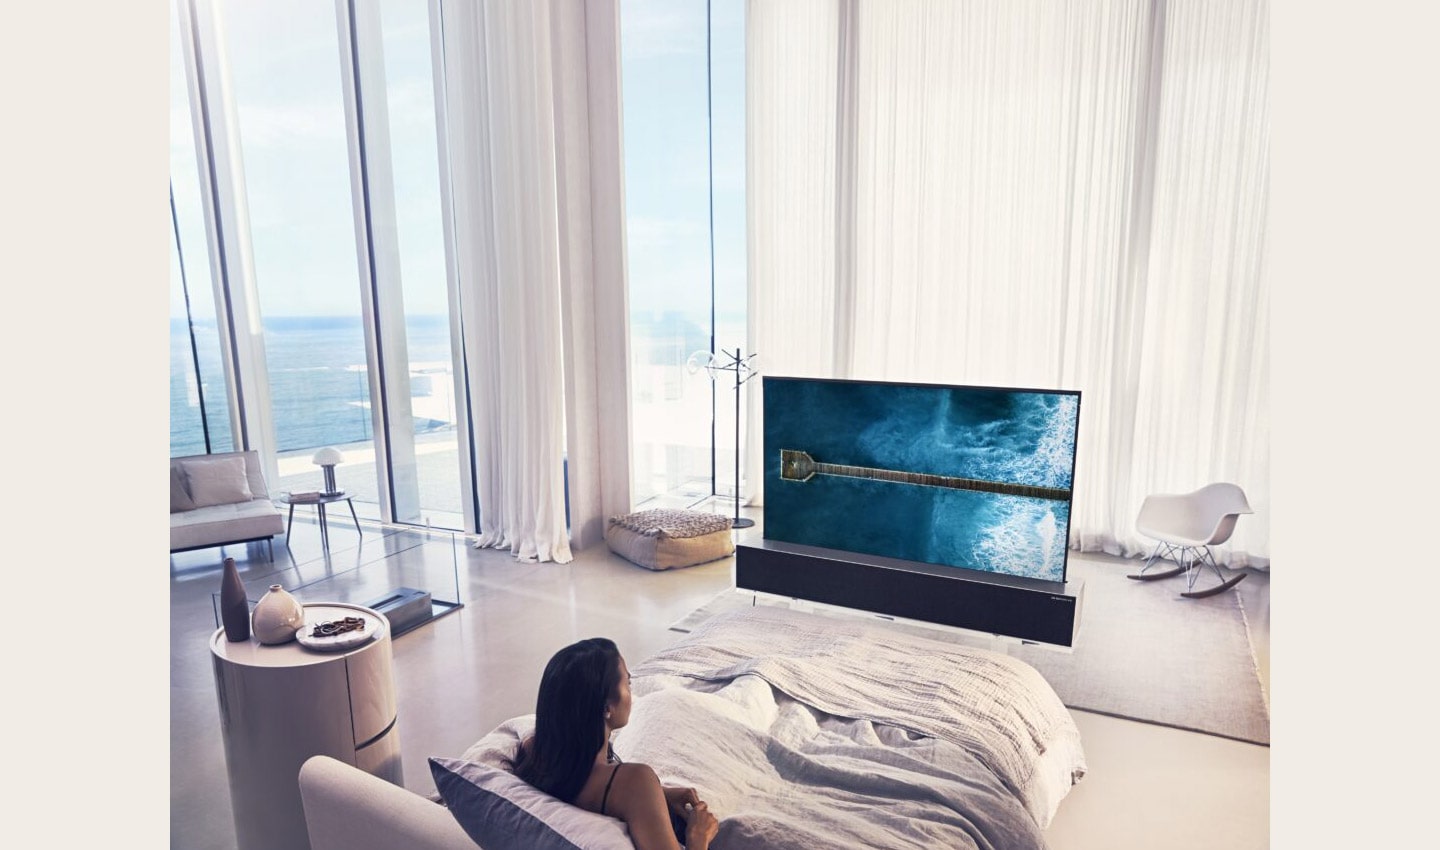 A woman in bed watching an LG SIGNATURE OLED TV R at a bright, beachside mansion.